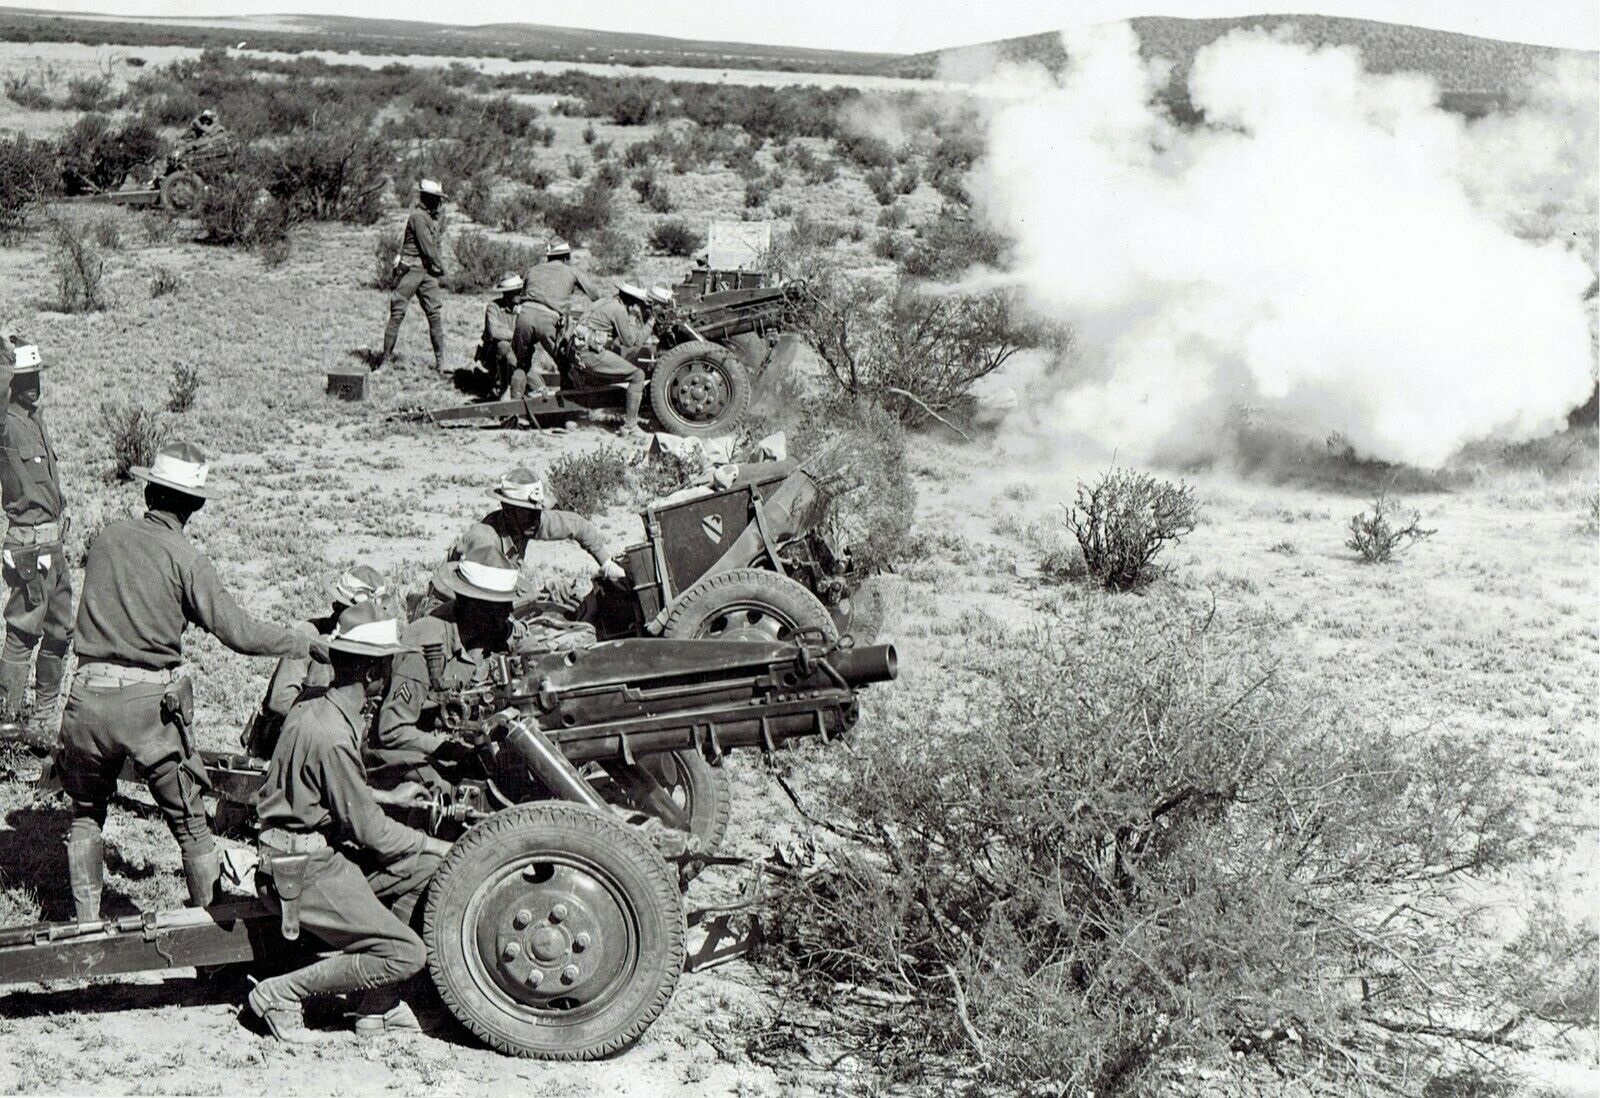 US Army 1st Cavalry in Balmorhea Texas in 1939 